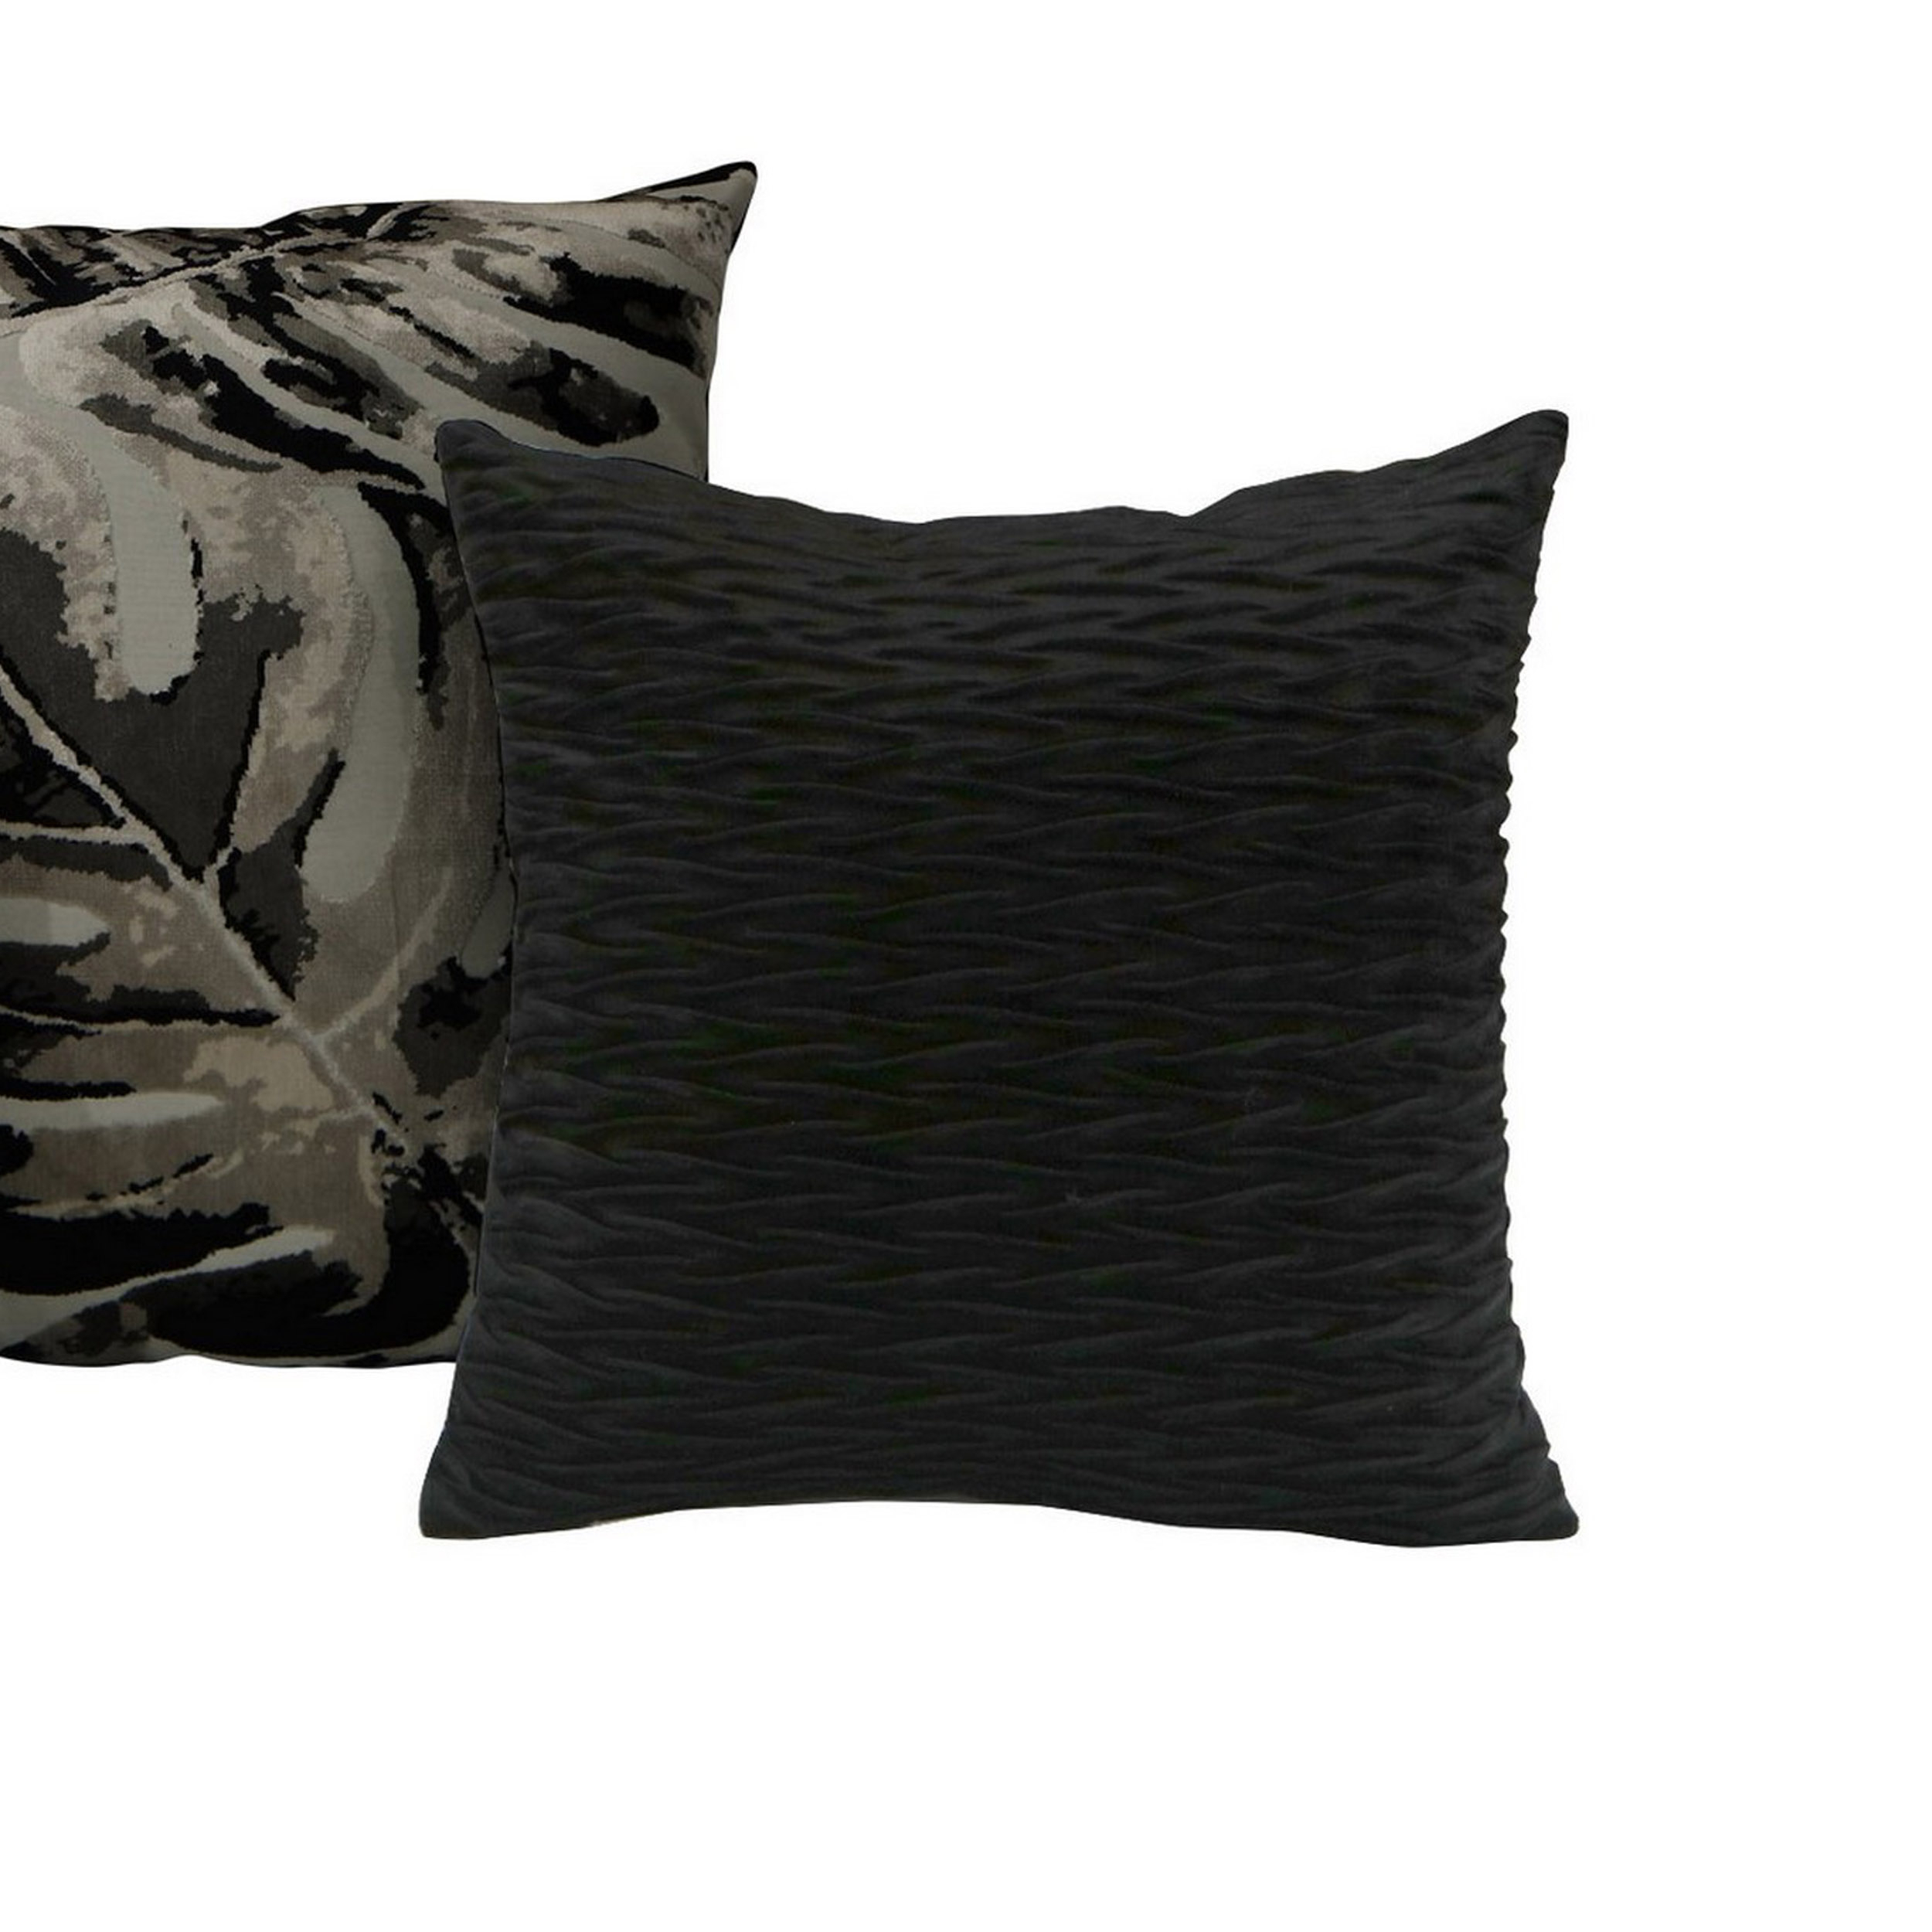 3 Neutral Accent Throw Pillows With Monstera Leaf, Velvet Charcoal Gray - Saltoro Sherpi